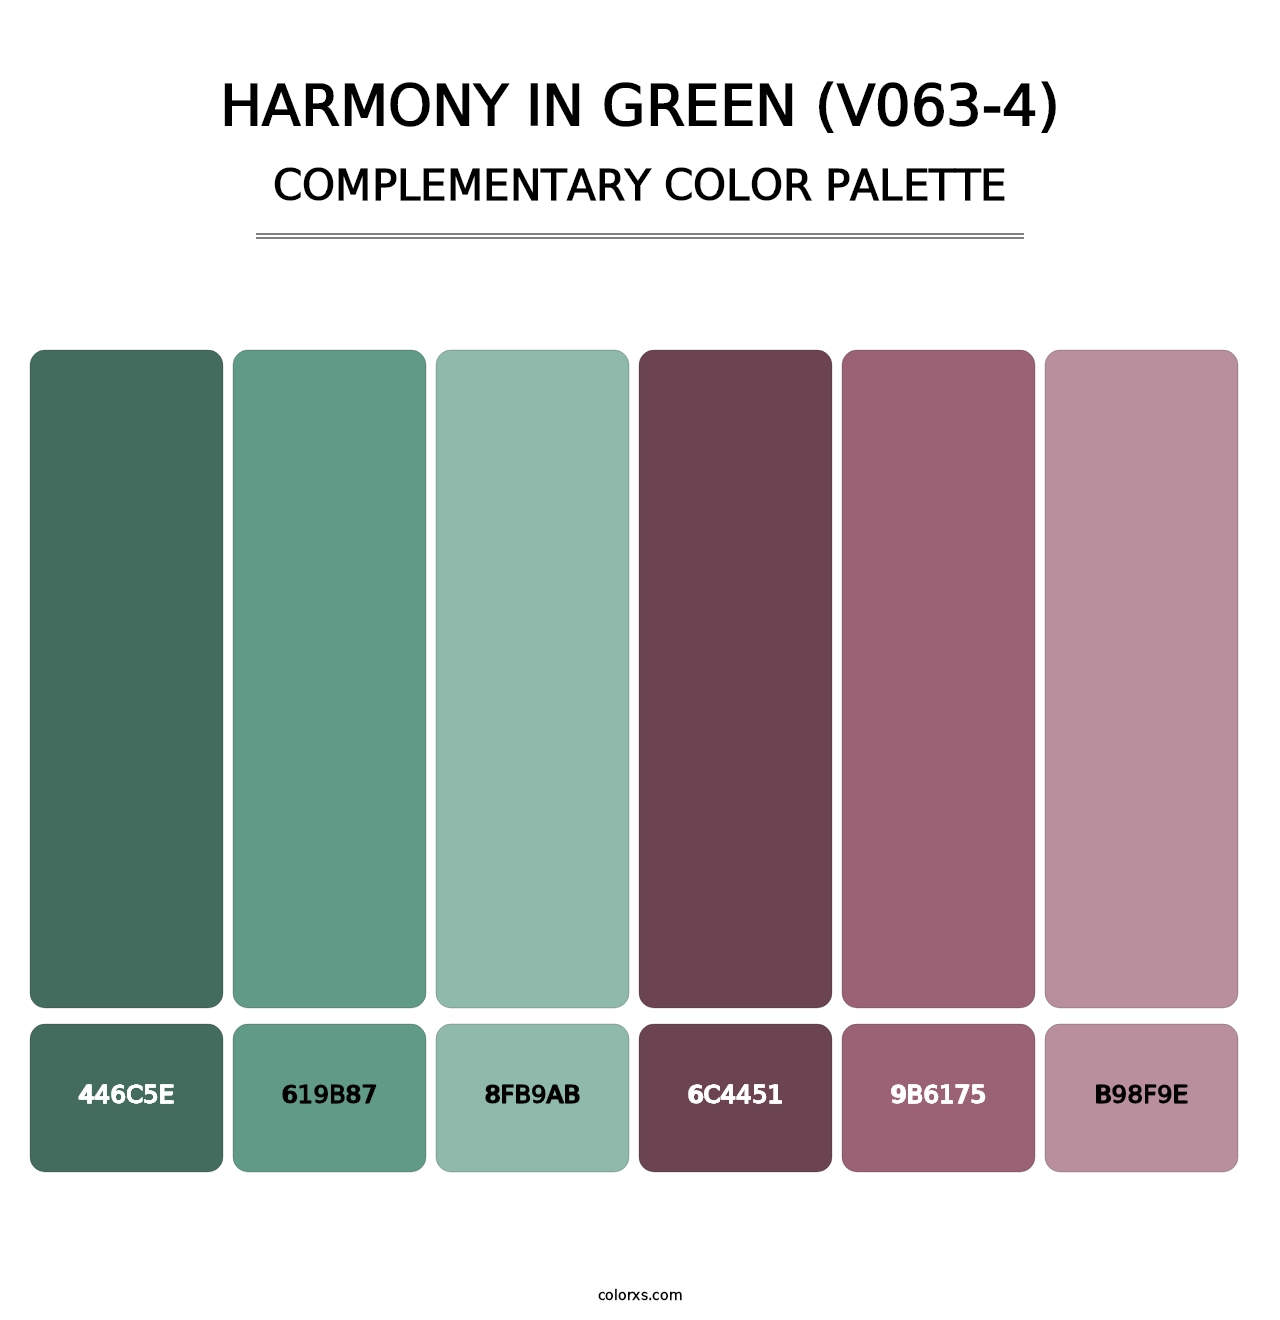 Harmony in Green (V063-4) - Complementary Color Palette